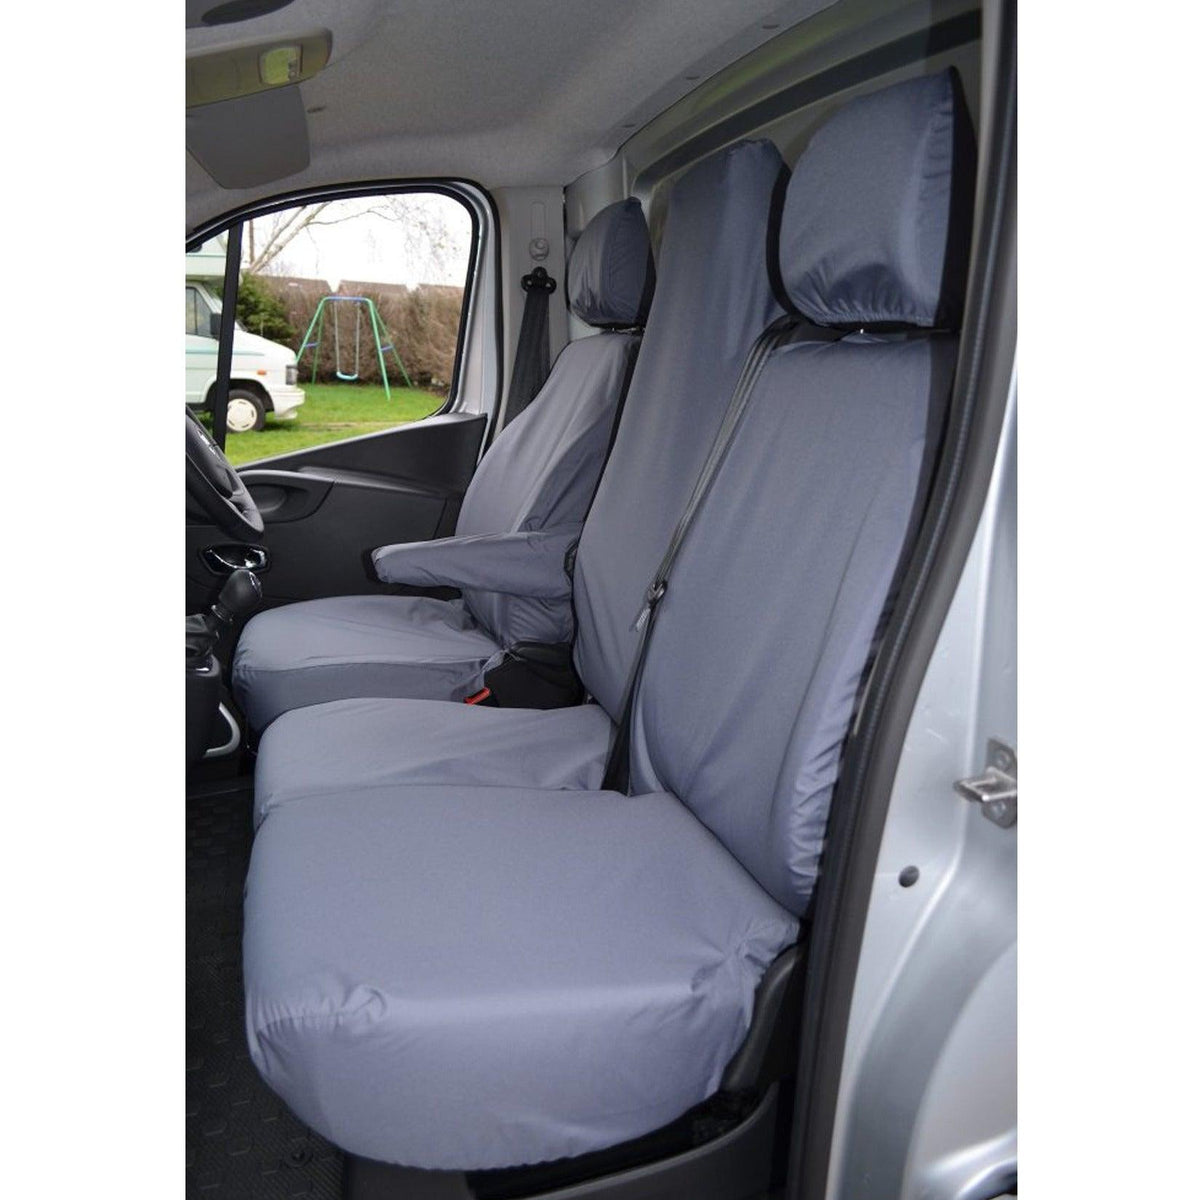 RENAULT TRAFIC 2014 ON - VAUXHALL VIVARO 2014-2019 FRONT DRIVER AND DOUBLE FOLDING PASSENGER UNDERSEAT STORAGE SEAT COVERS - GREY - Storm Xccessories2